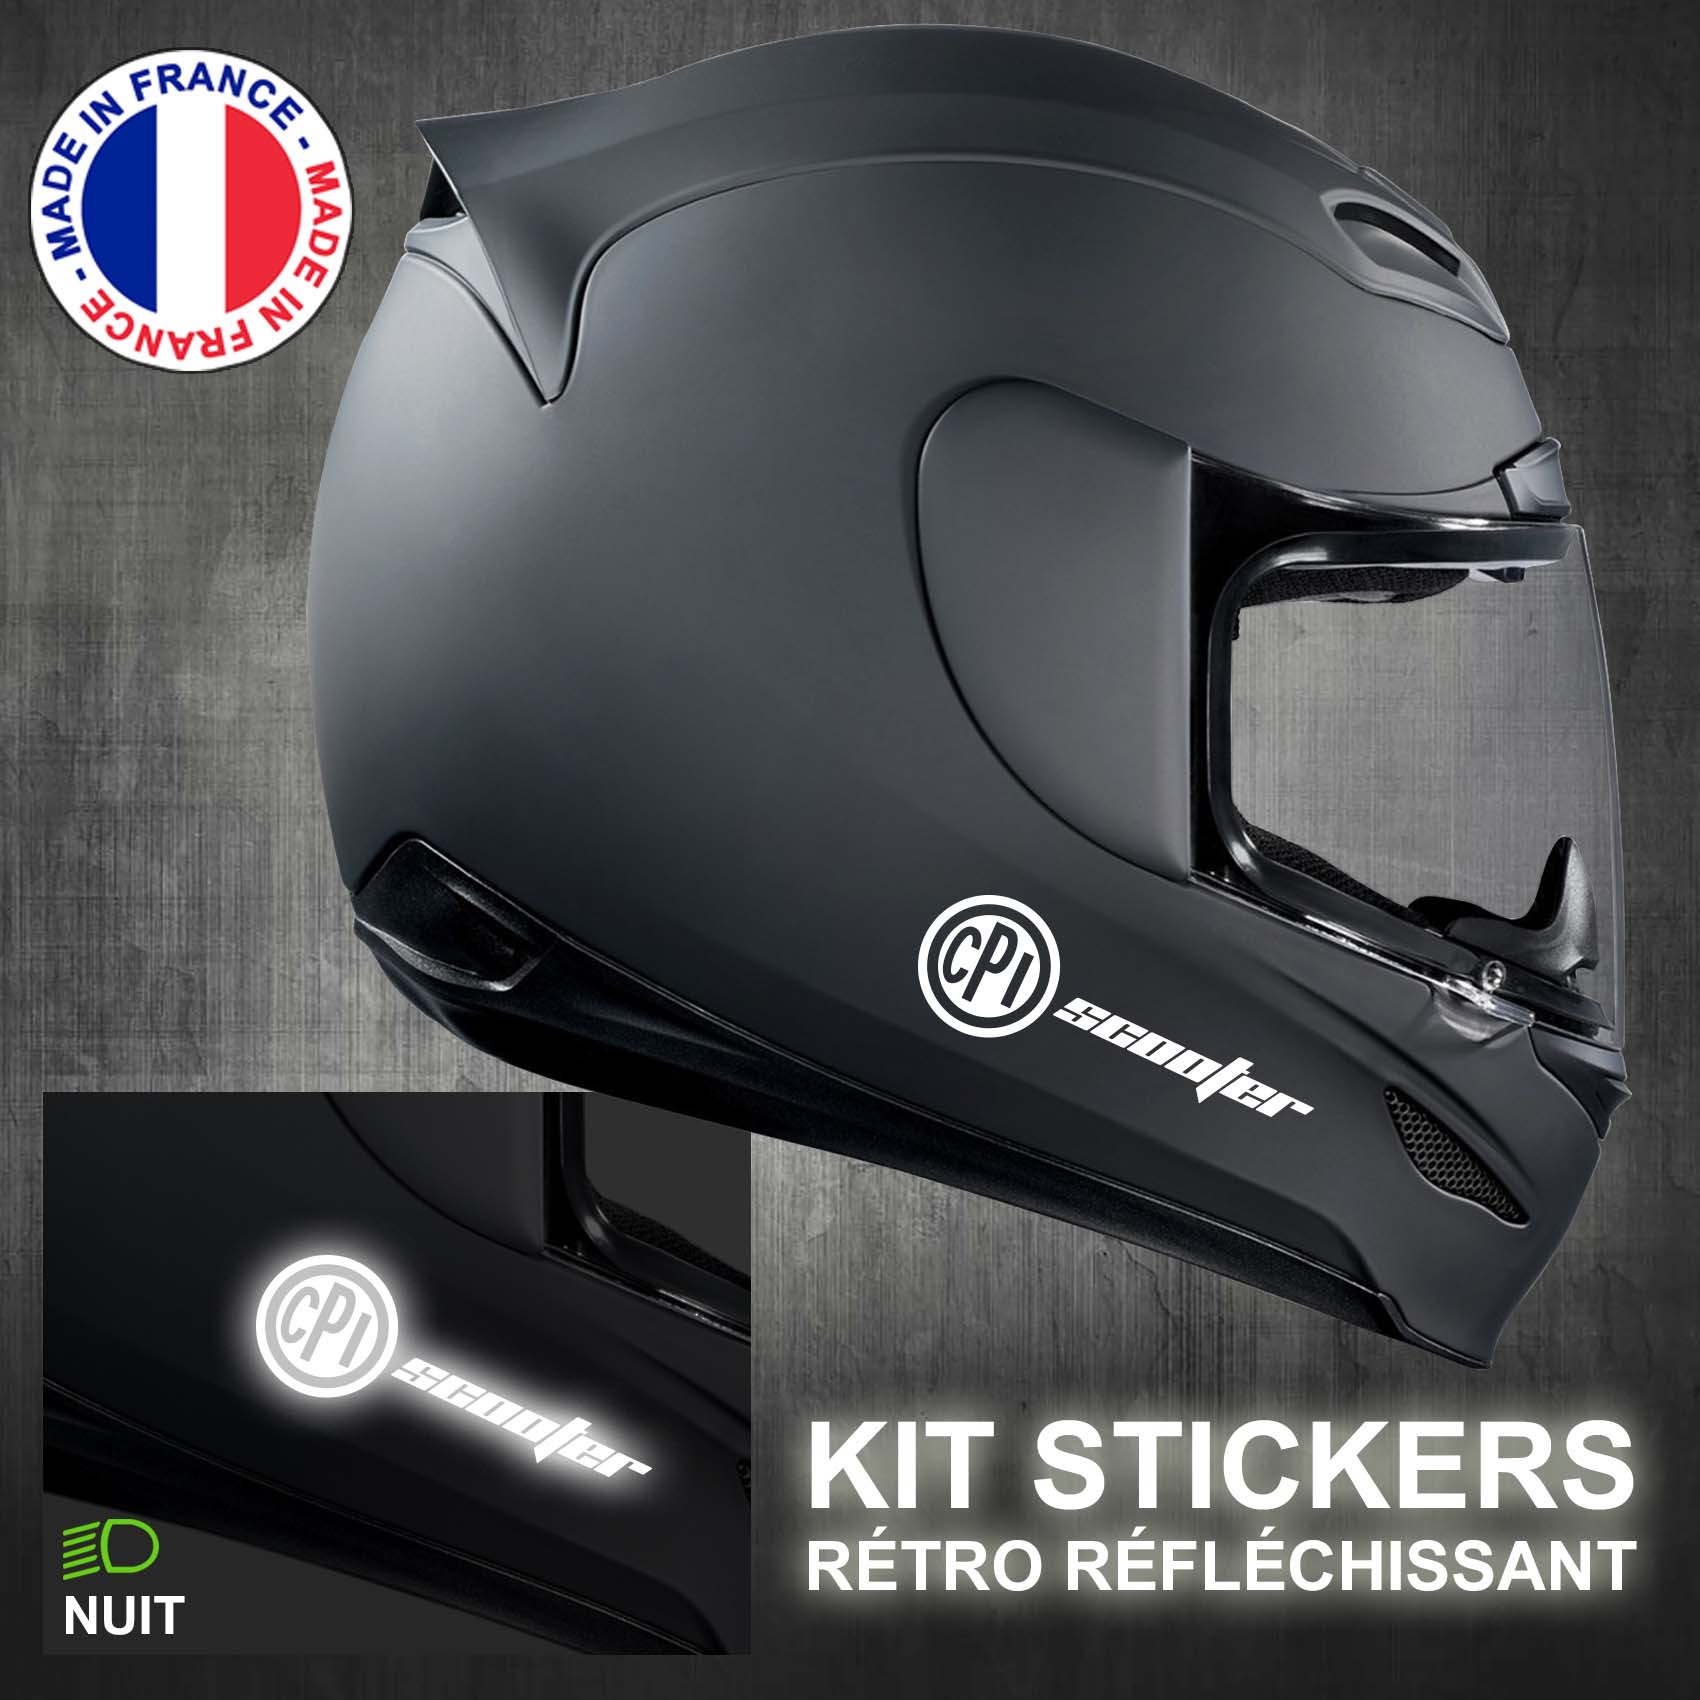 stickers-casque-moto-cpi-scooter-ref1-retro-reflechissant-autocollant-noir-moto-velo-tuning-racing-route-sticker-casques-adhesif-nuit-securite-decals-personnalise-personnalisable-min